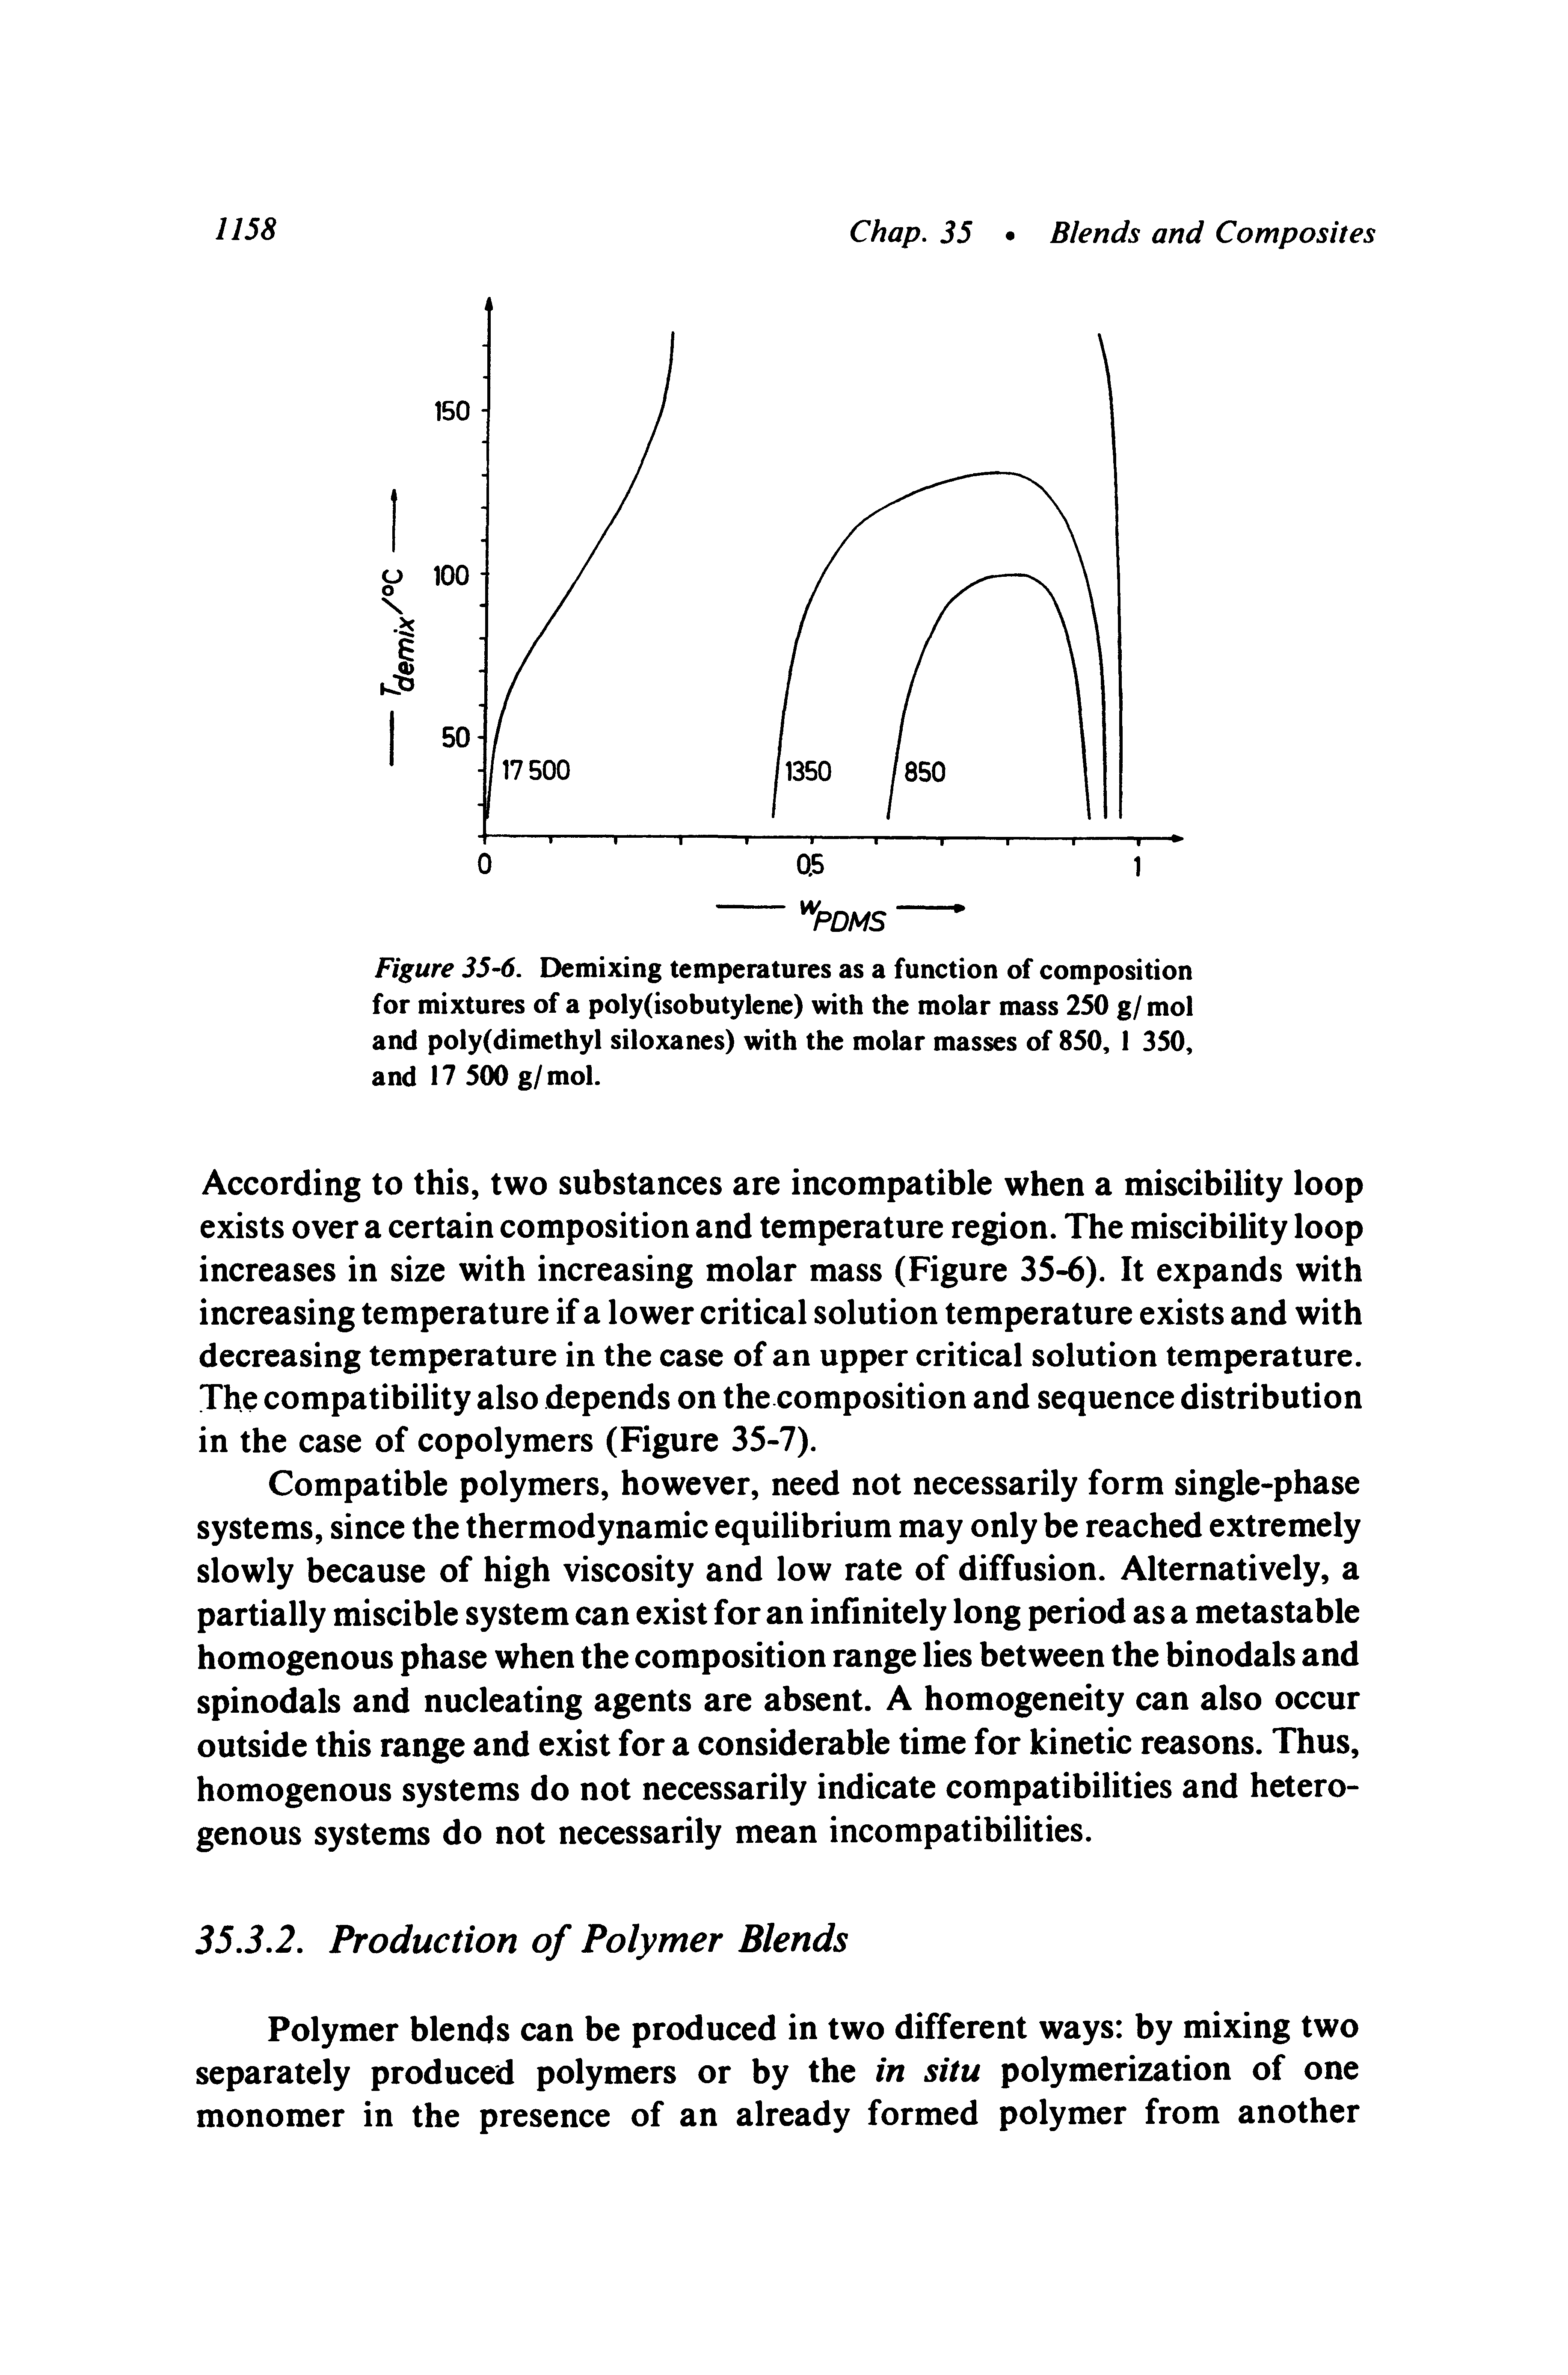 Figure 35-6. Demixing temperatures as a function of composition for mixtures of a poly(isobutylene) with the molar mass 250 g/mol and polyCdimethyl siloxanes) with the molar masses of 850, 1 350, and 17 500 g/mol.